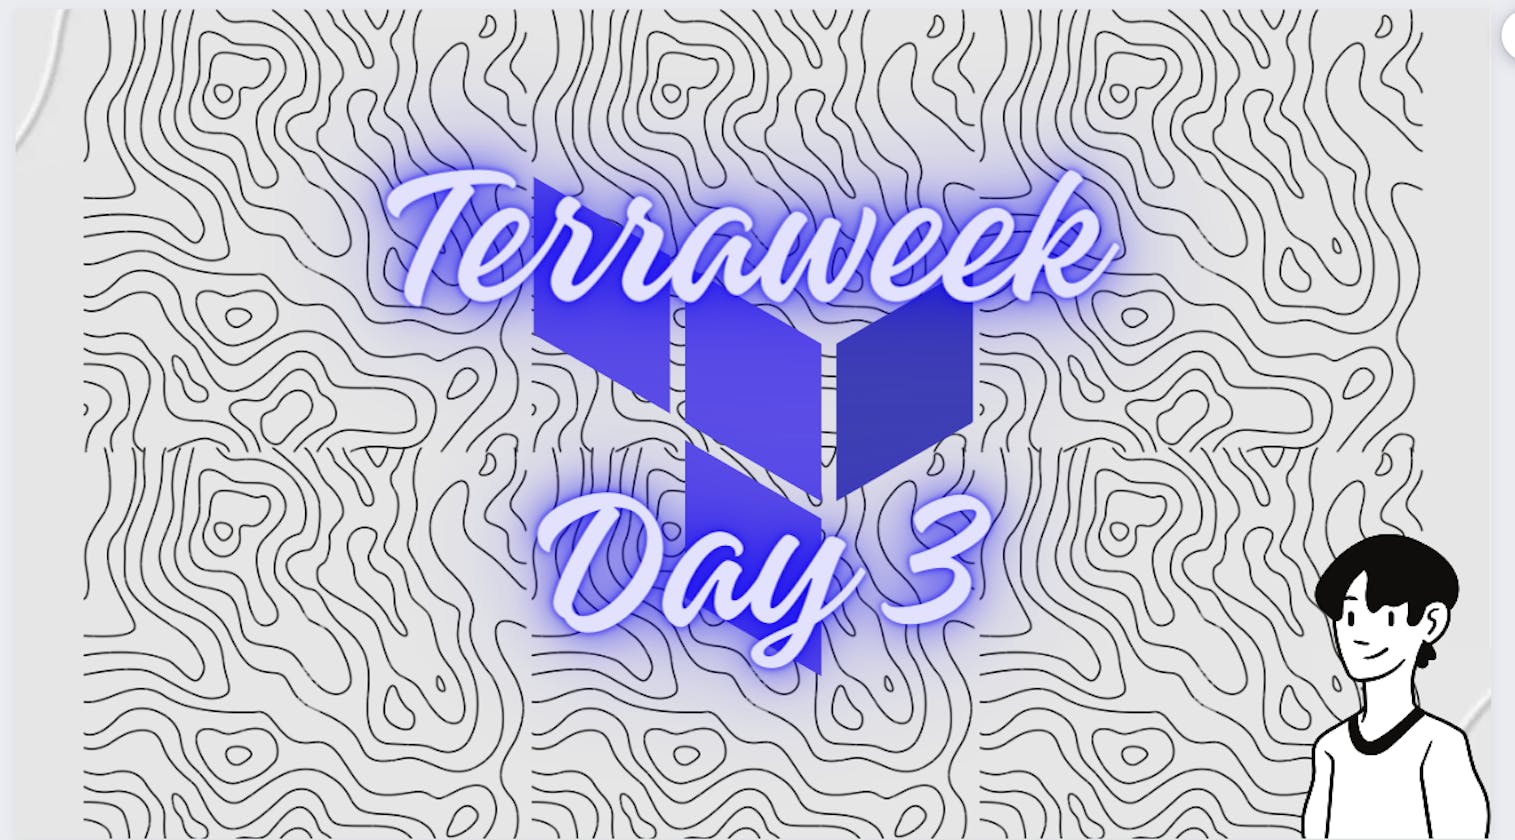 Terraweek day 3 : Unlocking the power of terraform with aws, creating instances